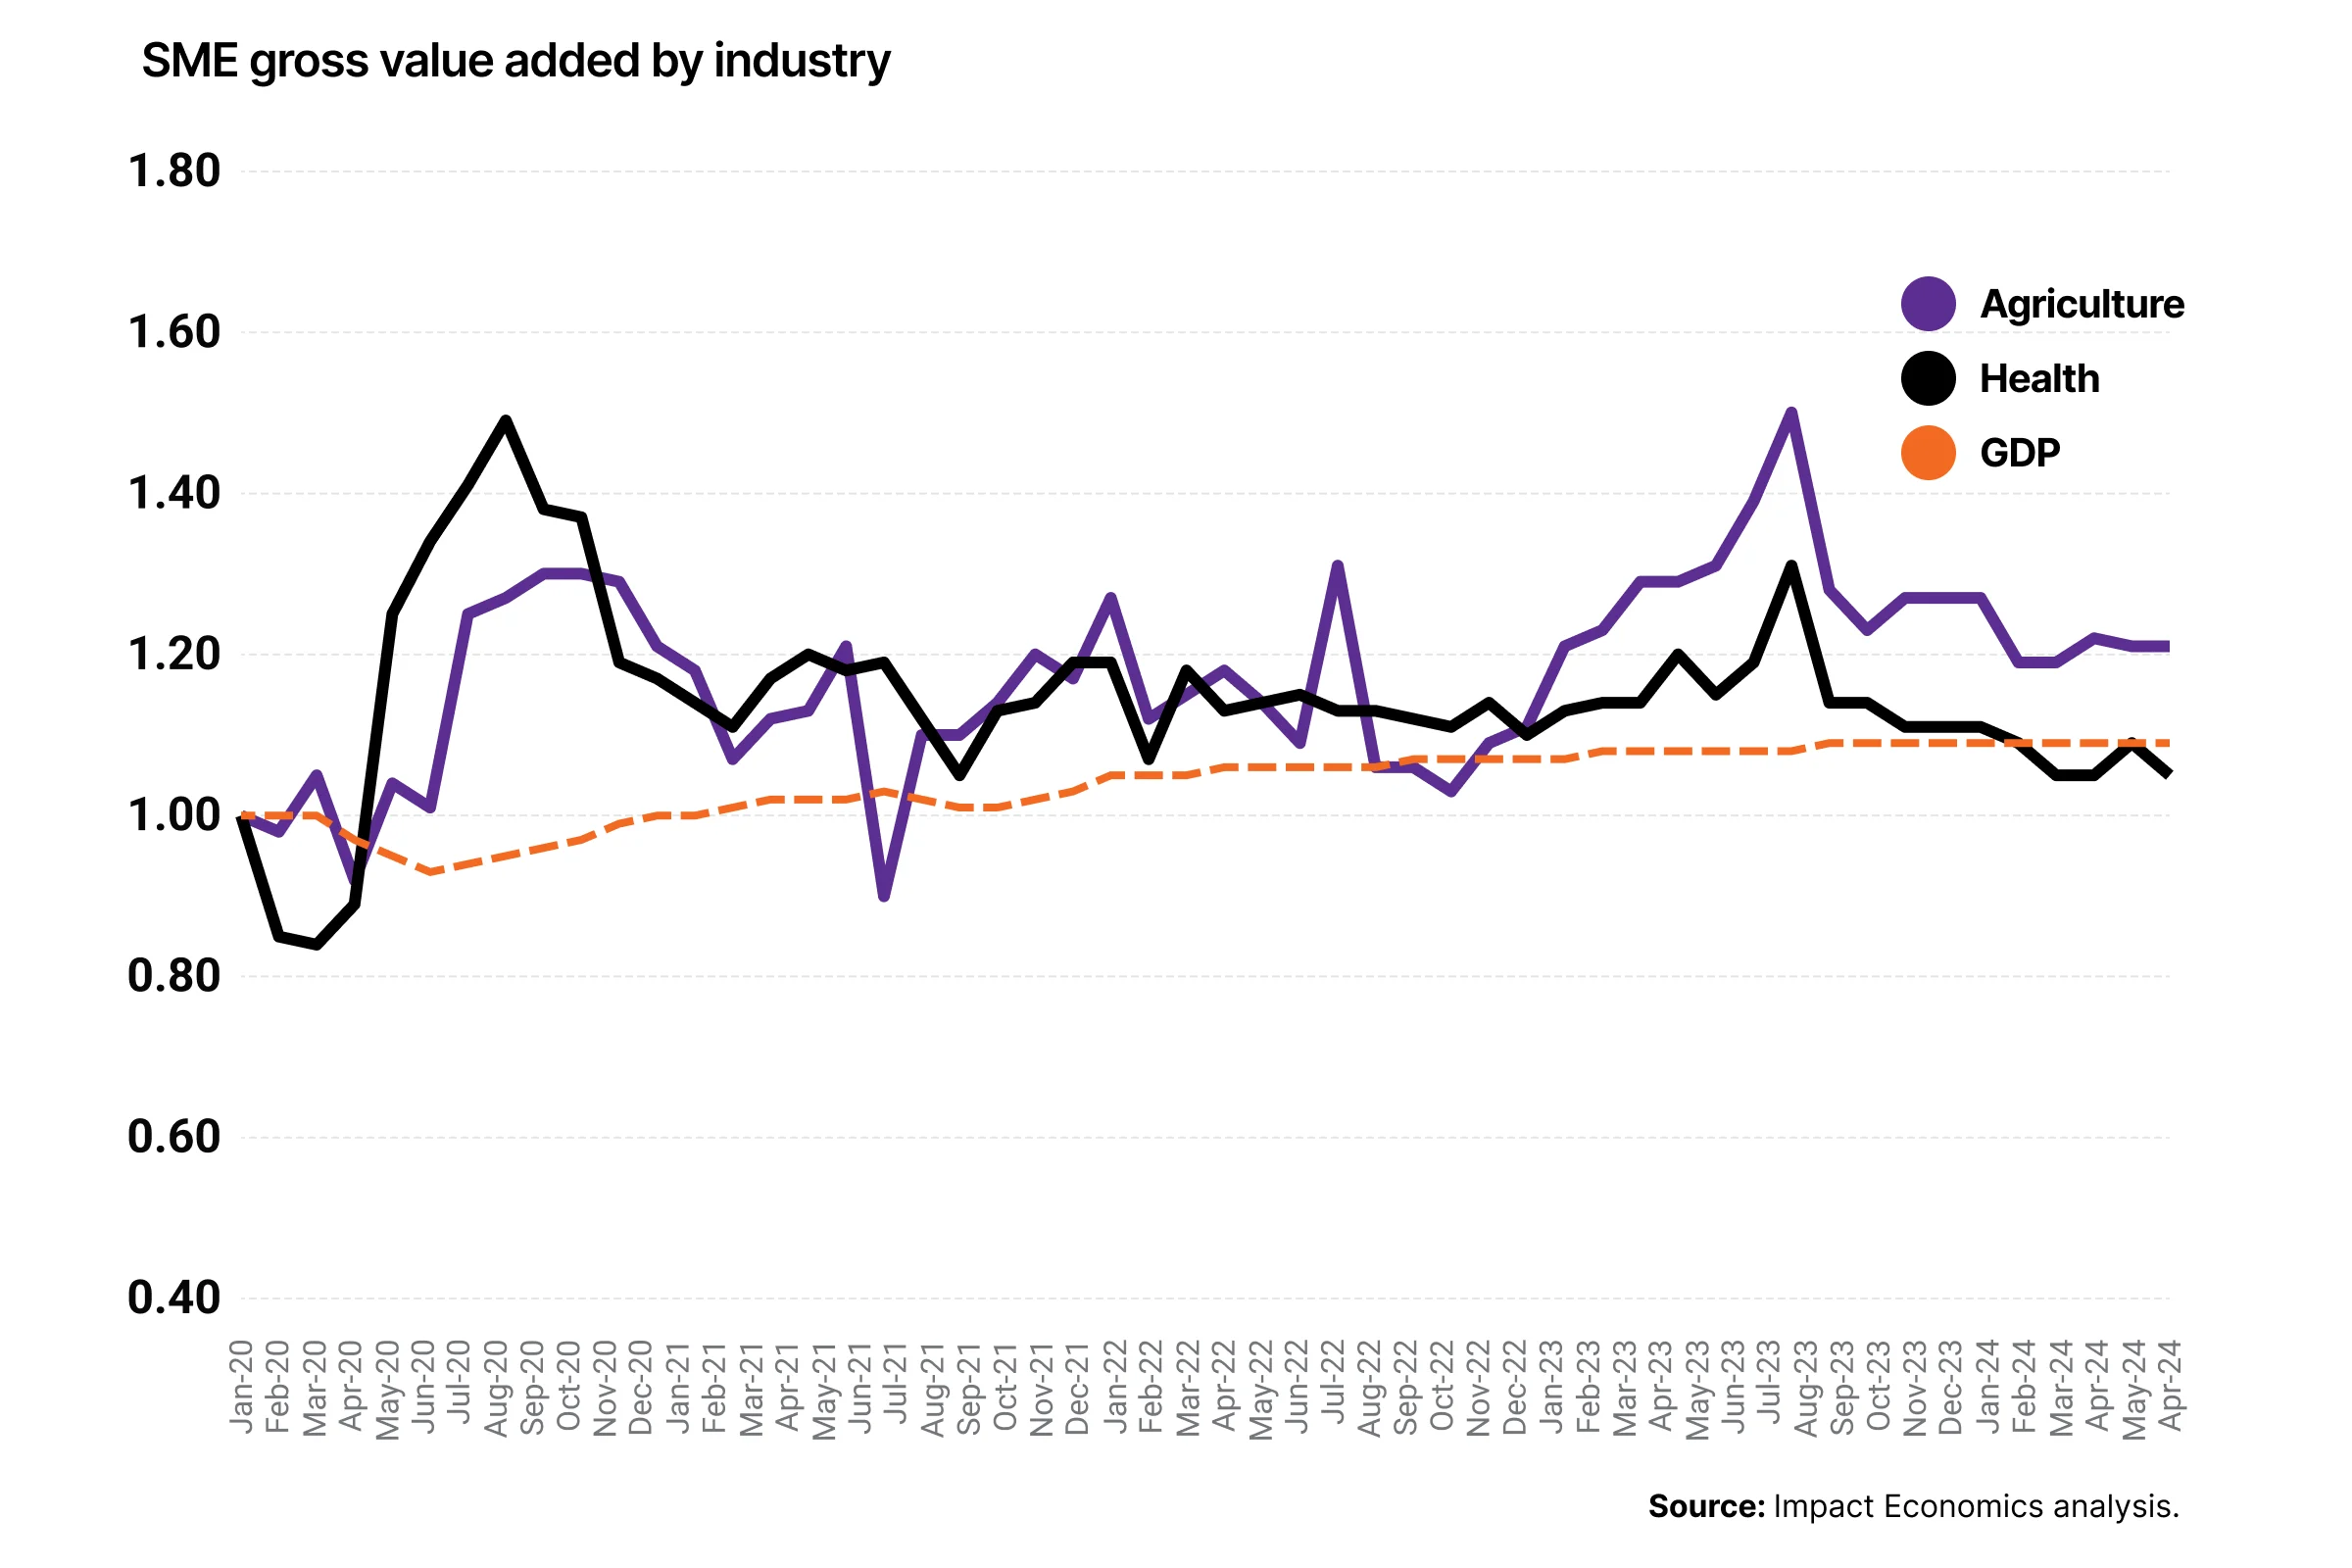 Graph showing performance of Health and agriculture industry 